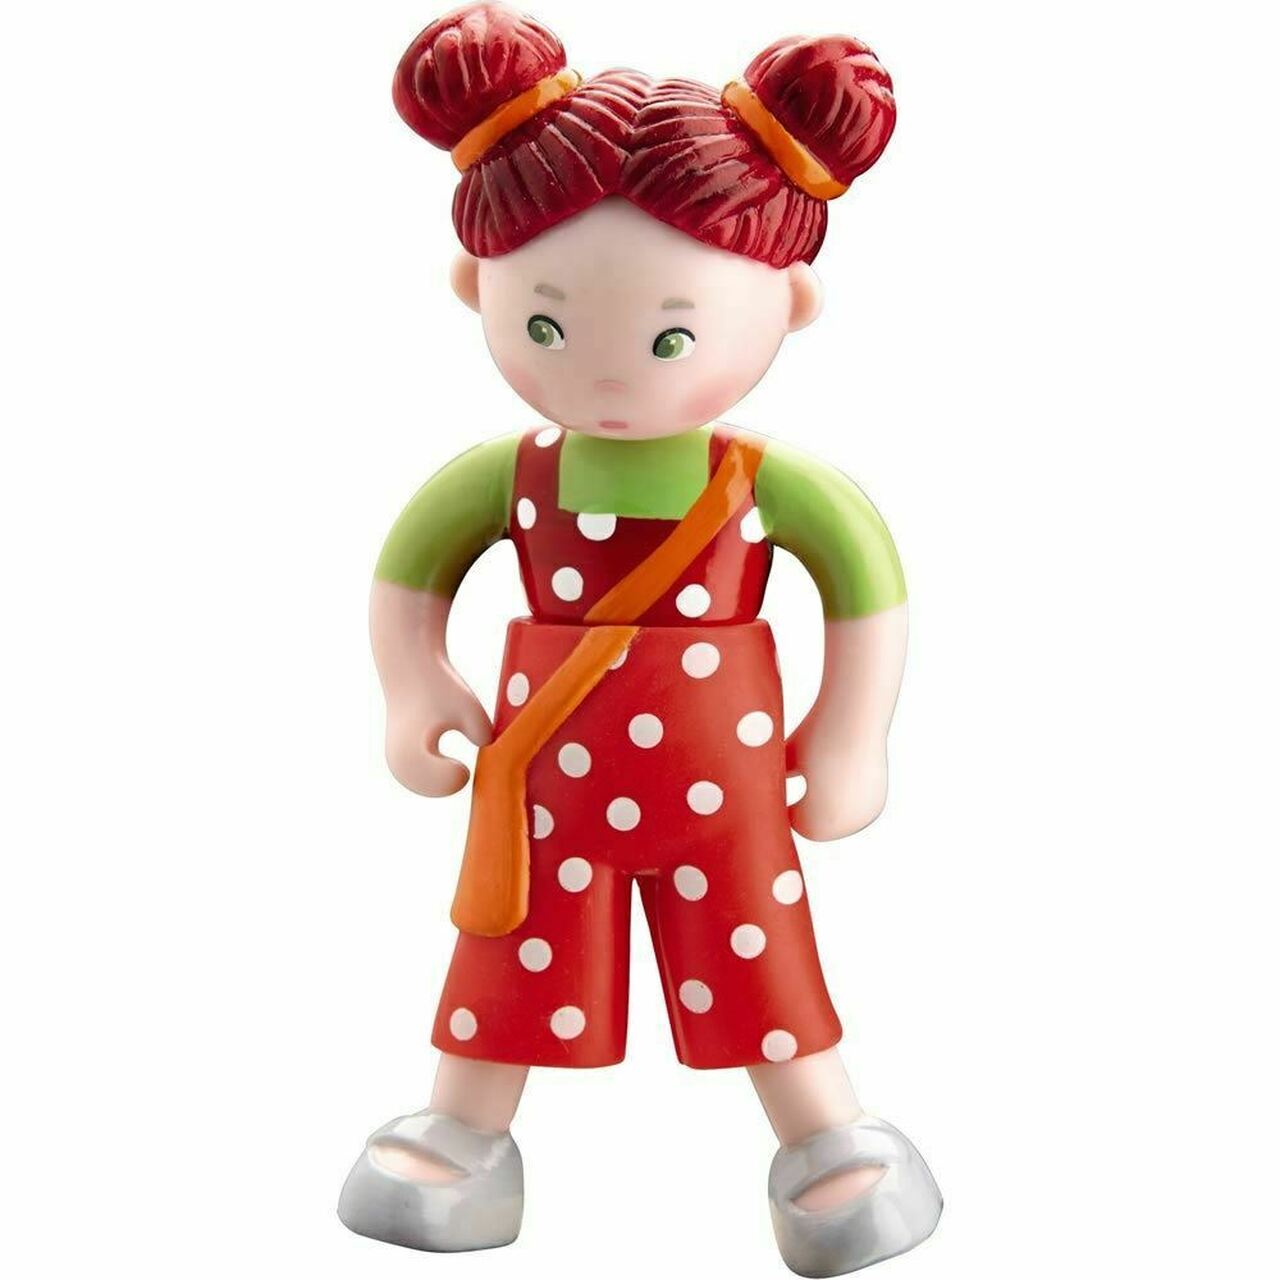 HABA Little Friends Felicitas Doll with Red Pigtails